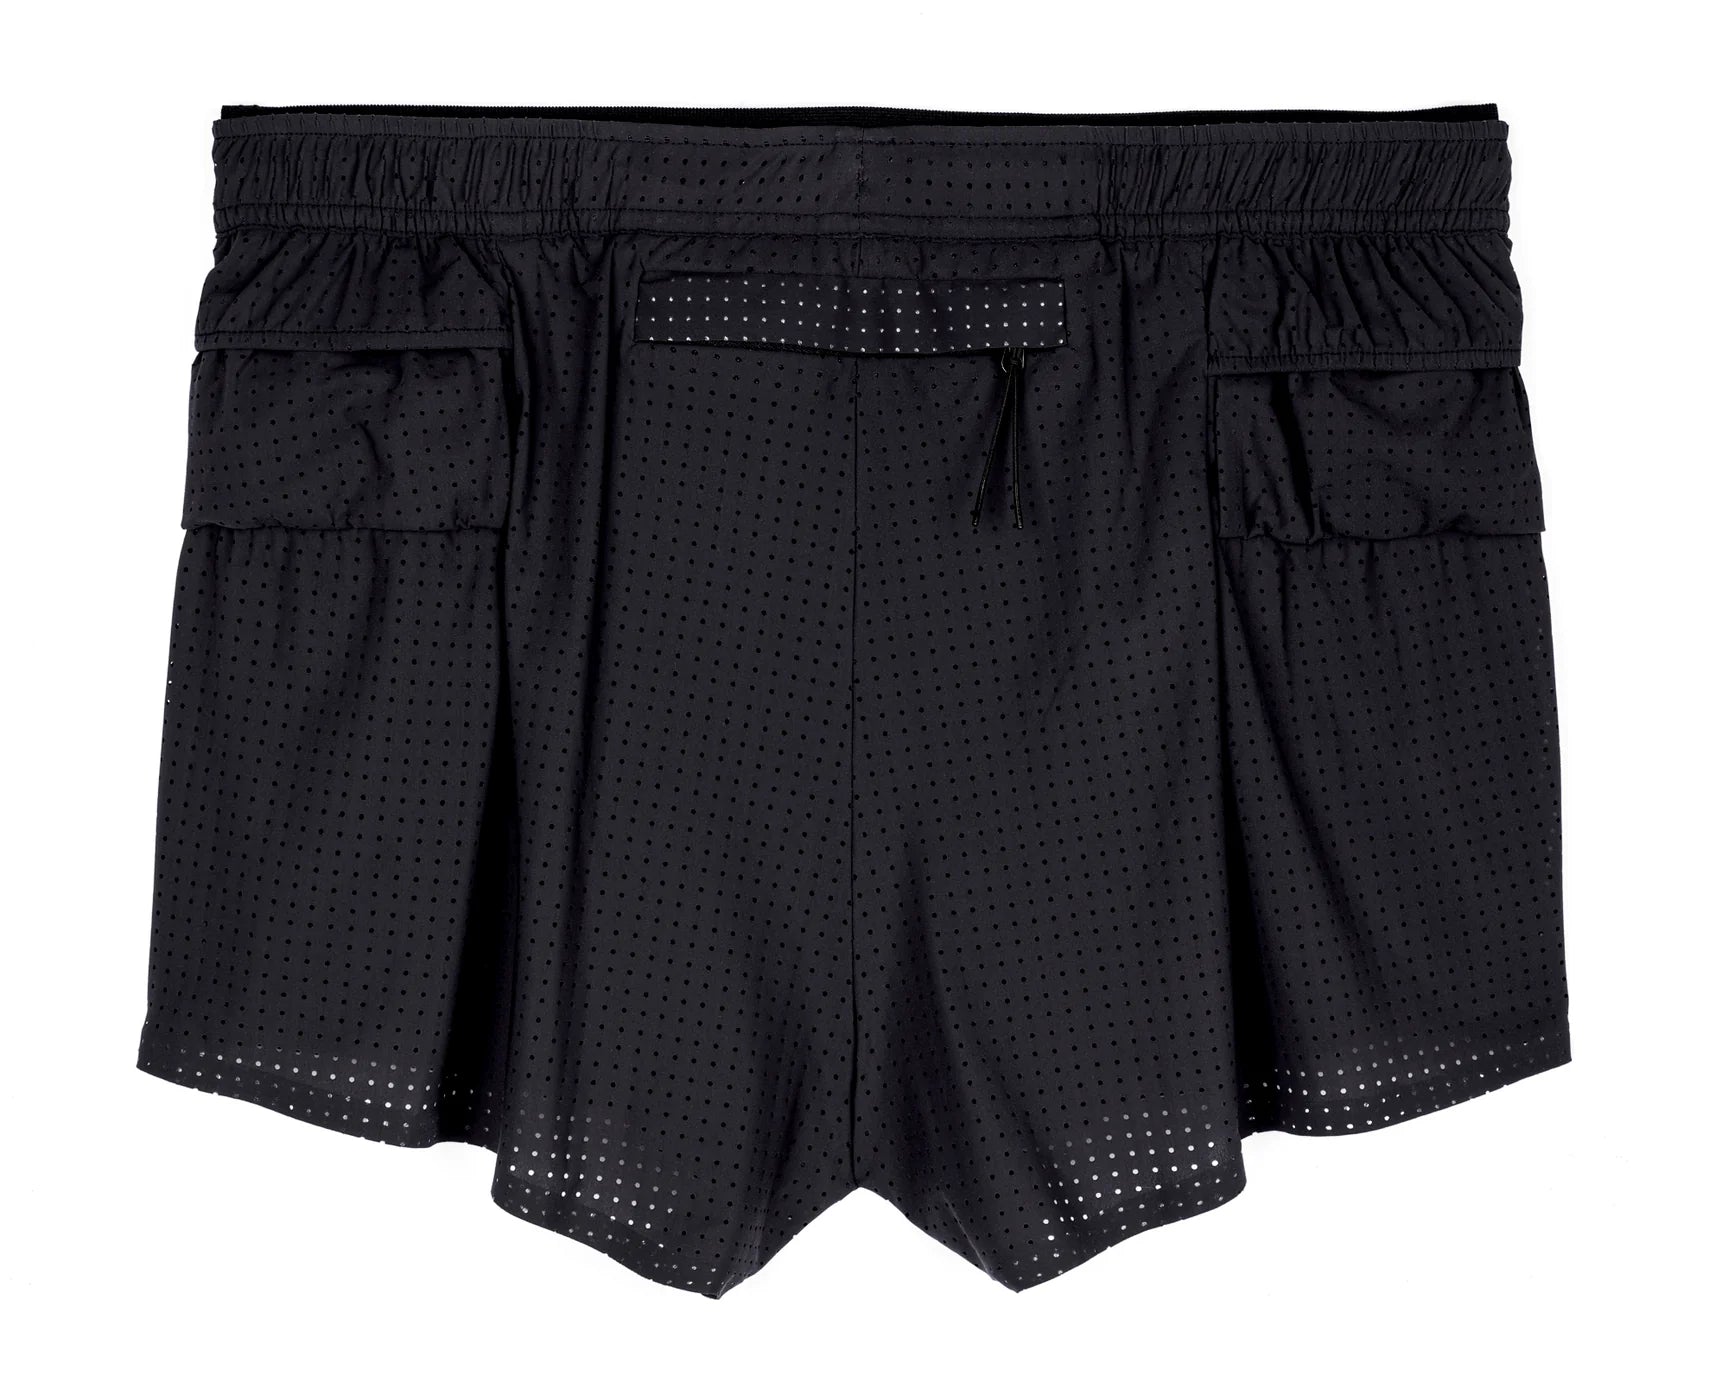 Space-O™ 2.5 Distance Shorts – Satisfy